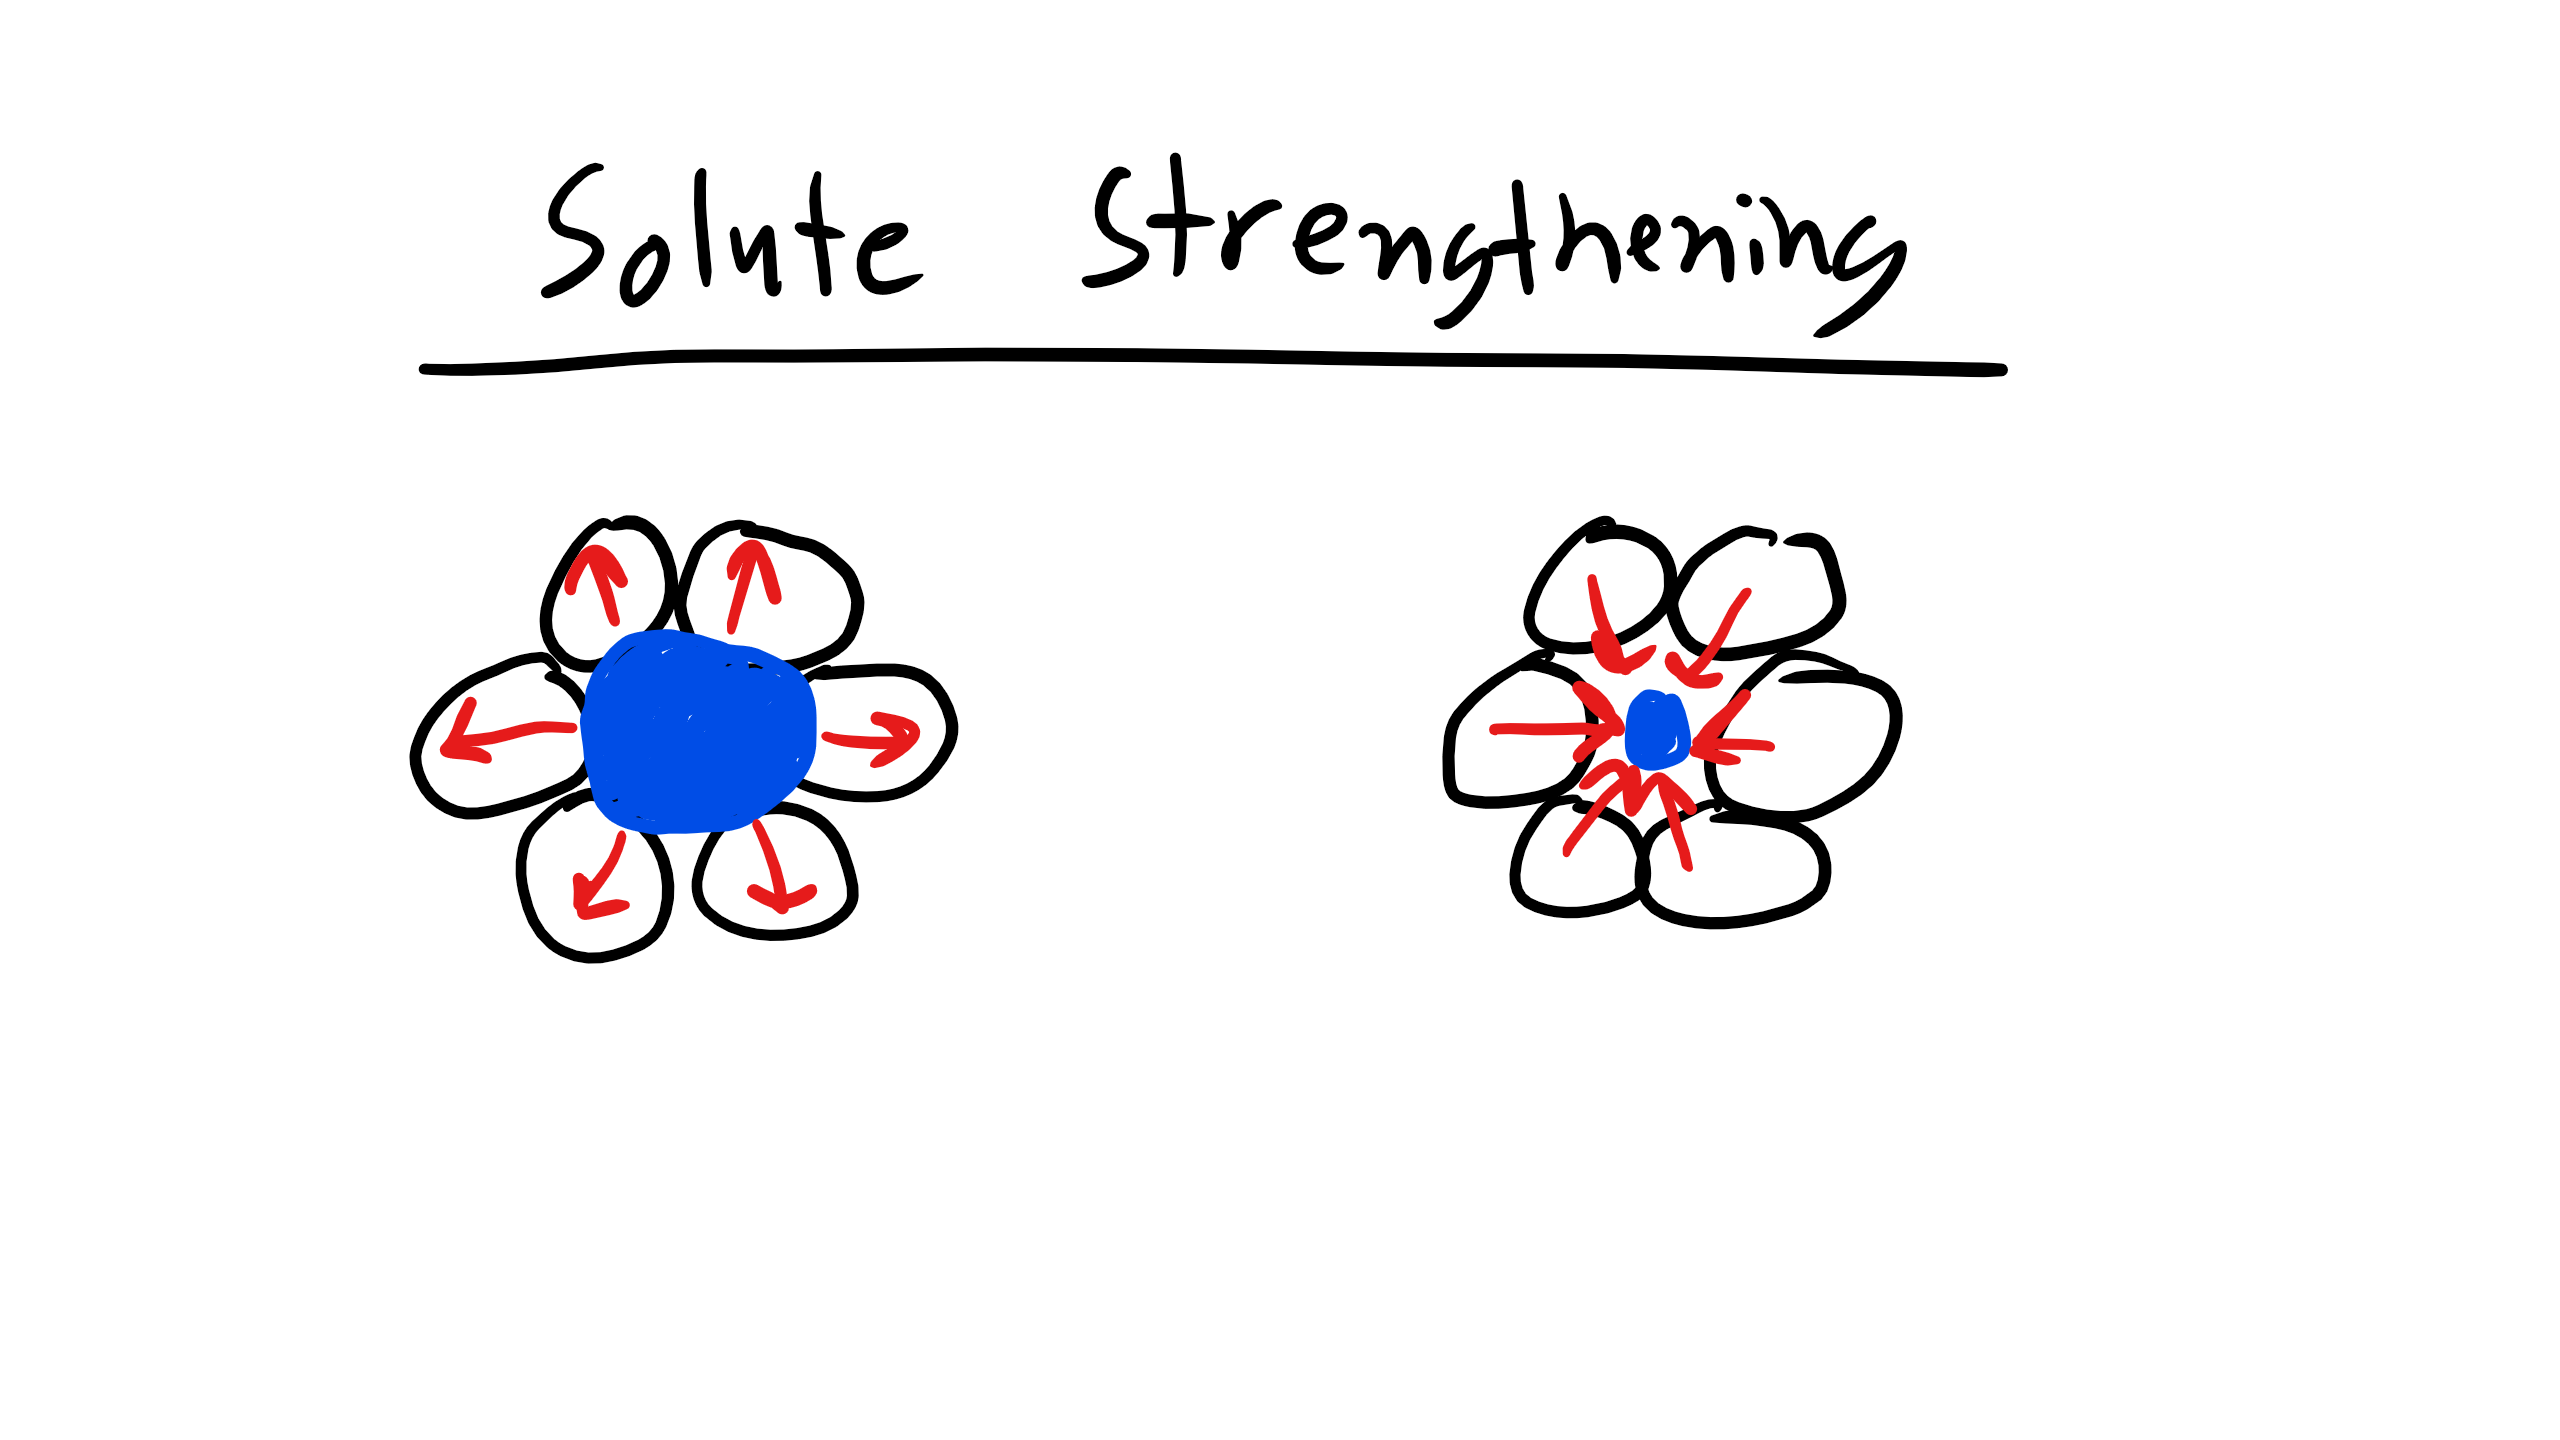 solutestrength.png